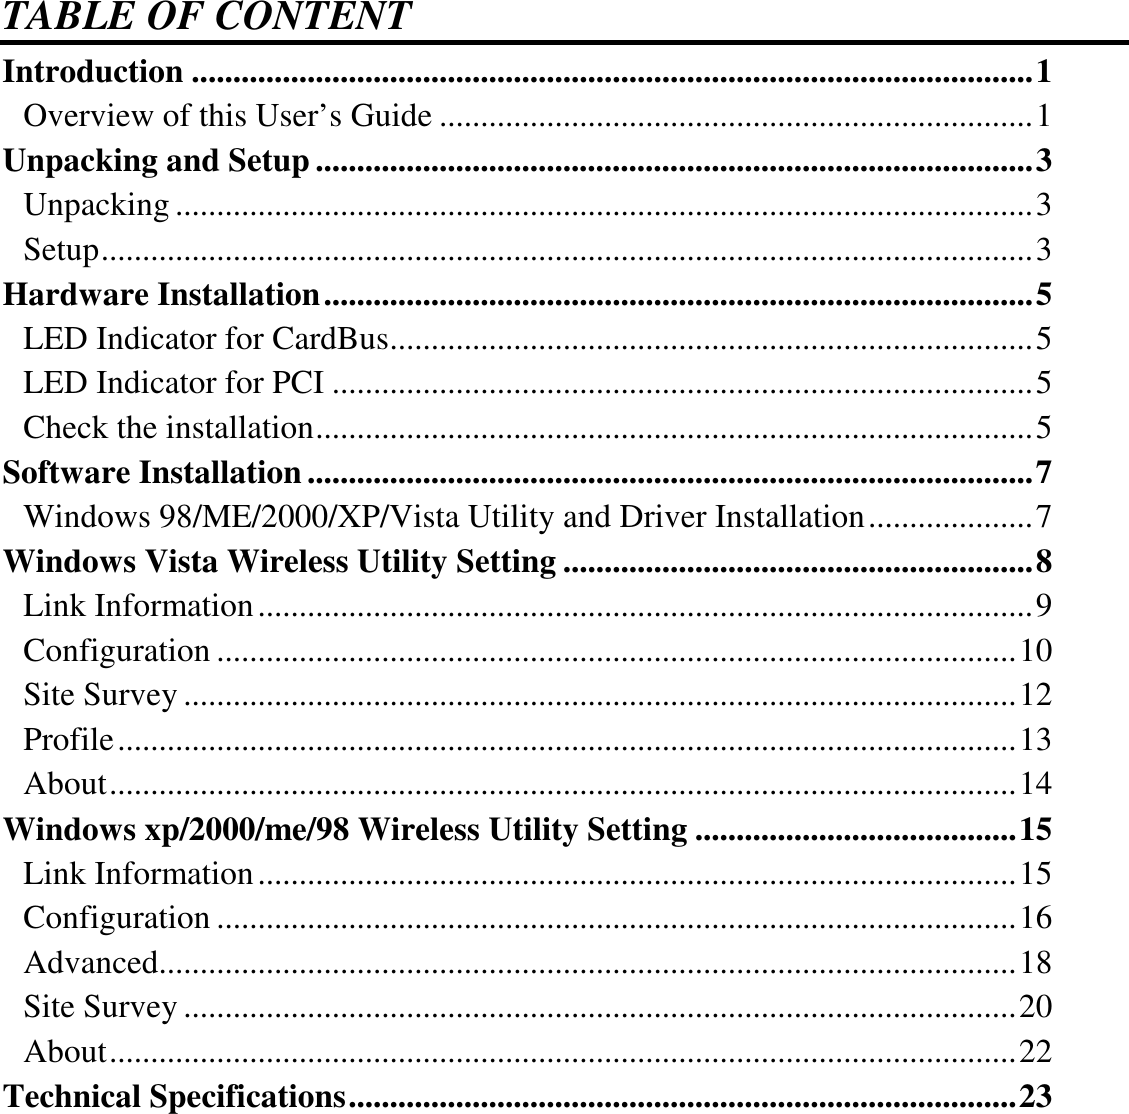  TABLE OF CONTENT Introduction ......................................................................................................1 Overview of this User’s Guide ........................................................................1 Unpacking and Setup .......................................................................................3 Unpacking ........................................................................................................3 Setup.................................................................................................................3 Hardware Installation......................................................................................5 LED Indicator for CardBus..............................................................................5 LED Indicator for PCI .....................................................................................5 Check the installation.......................................................................................5 Software Installation........................................................................................7 Windows 98/ME/2000/XP/Vista Utility and Driver Installation....................7 Windows Vista Wireless Utility Setting .........................................................8 Link Information..............................................................................................9 Configuration .................................................................................................10 Site Survey .....................................................................................................12 Profile.............................................................................................................13 About..............................................................................................................14 Windows xp/2000/me/98 Wireless Utility Setting .......................................15 Link Information............................................................................................15 Configuration .................................................................................................16 Advanced........................................................................................................18 Site Survey .....................................................................................................20 About..............................................................................................................22 Technical Specifications.................................................................................23  